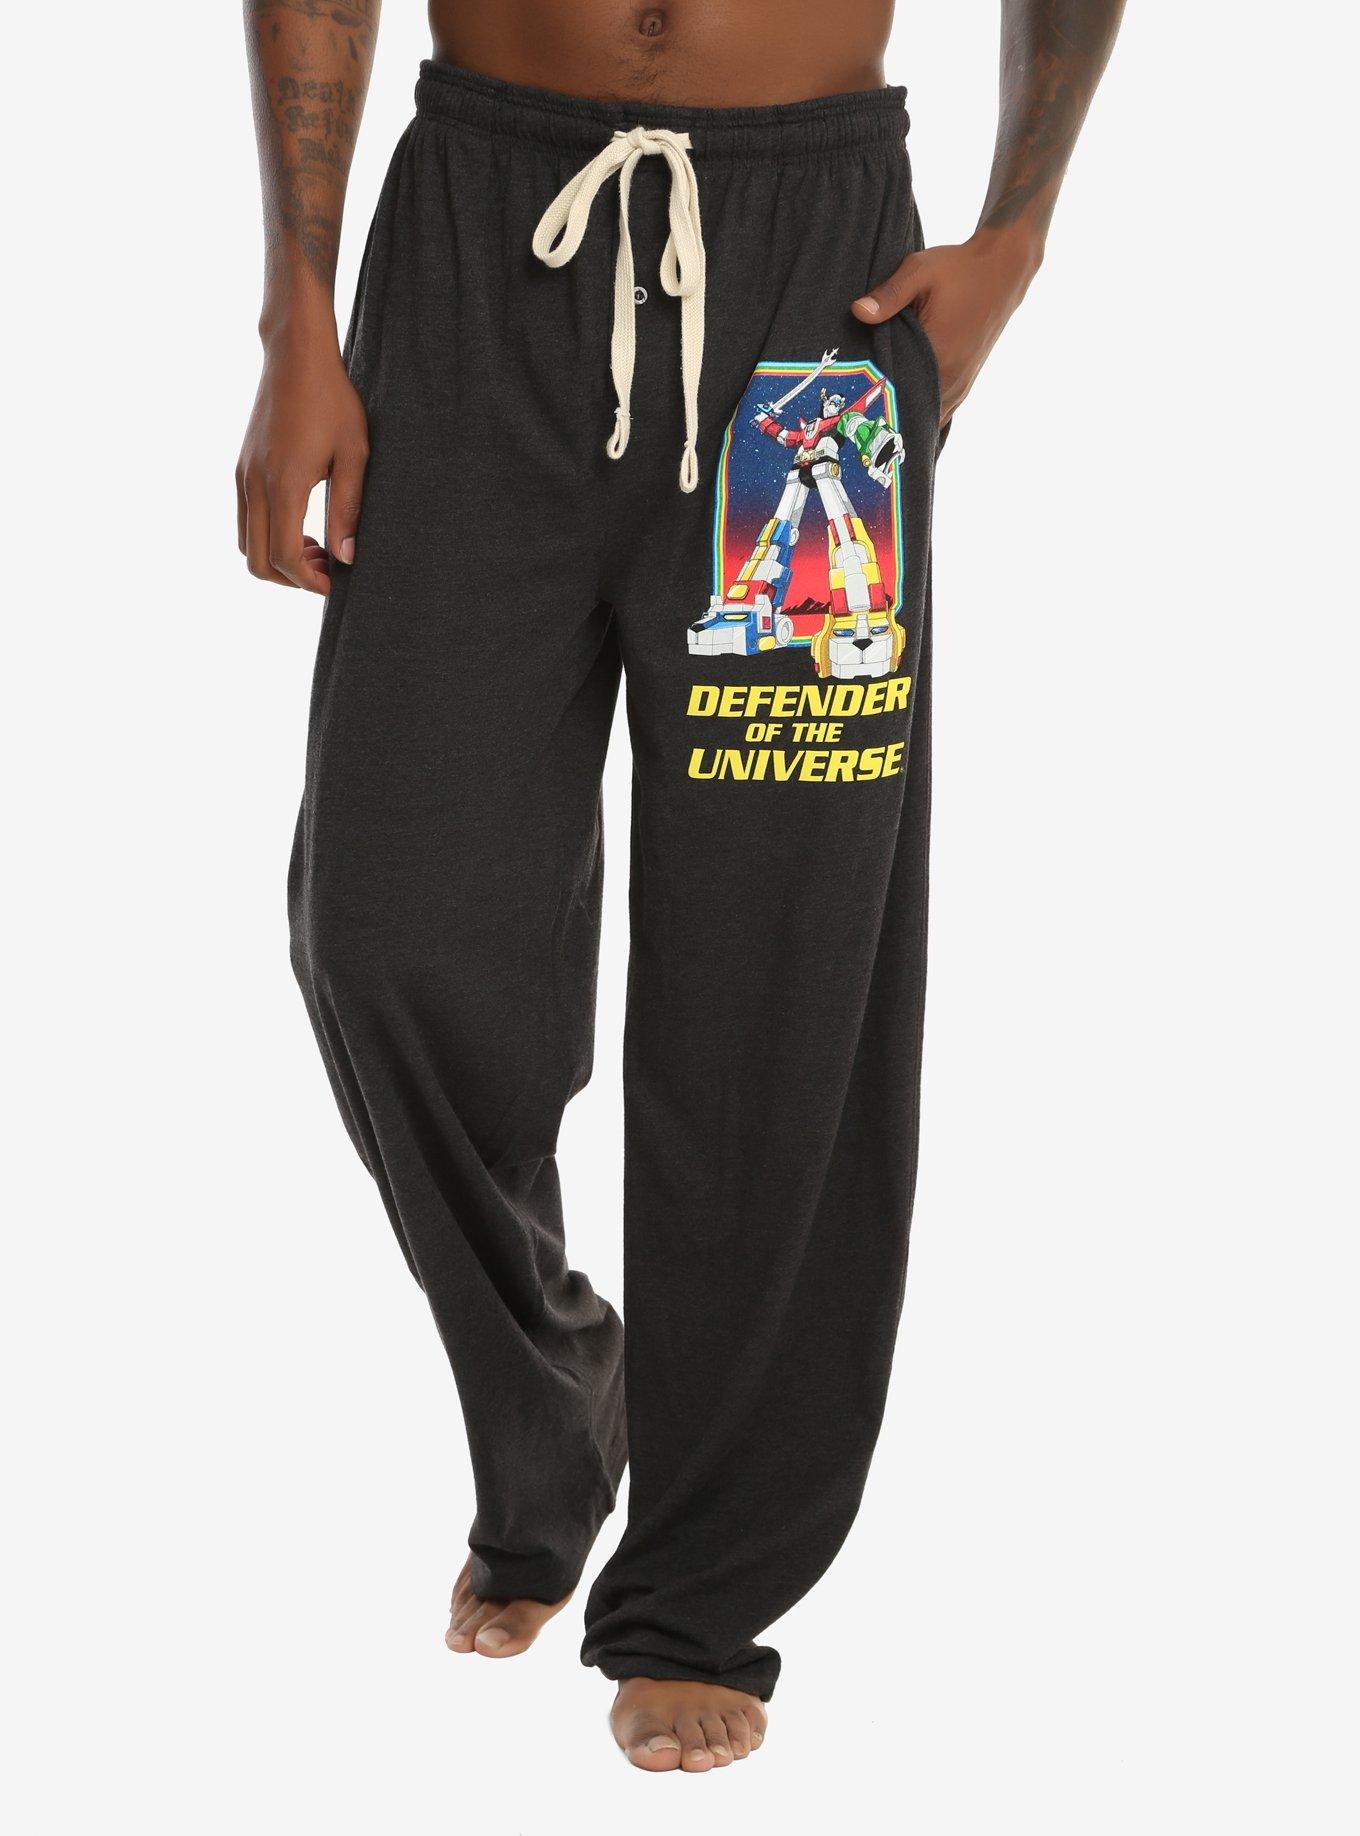 Voltron: Defender Of The Universe Guys Pajama Pants | Hot Topic